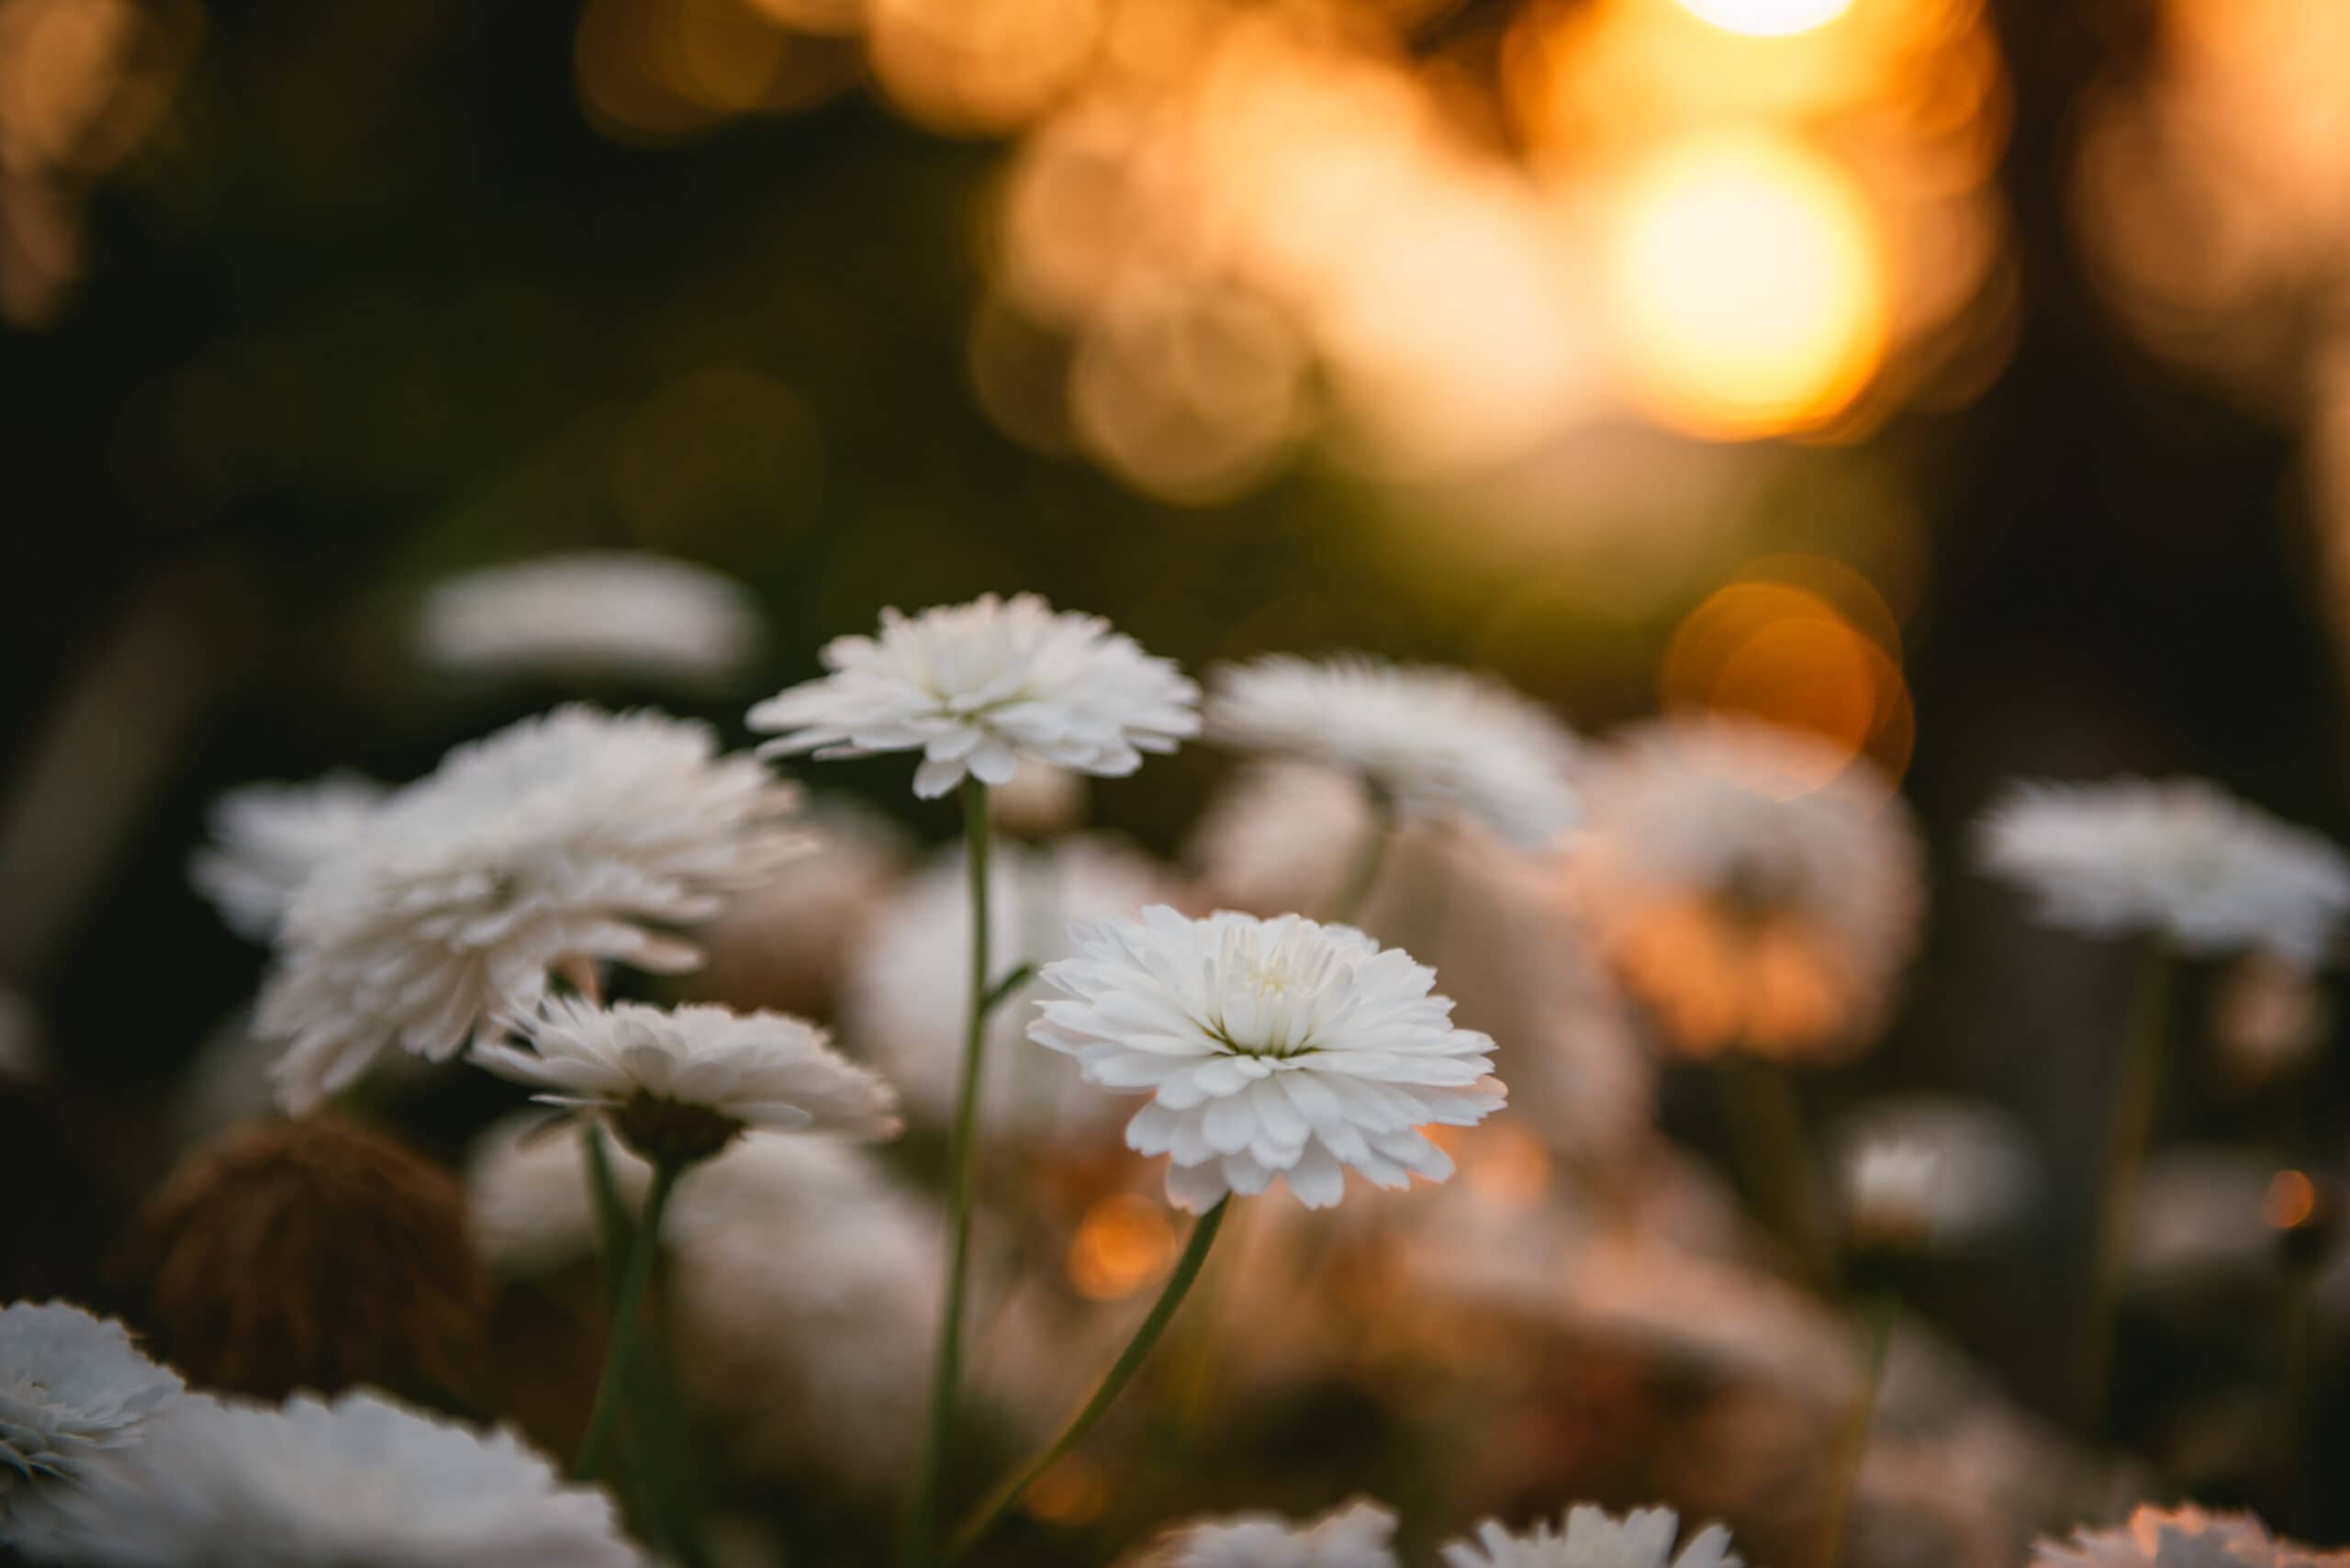 Detail of a delicate flower illuminated by the setting sun during their Corfu elopement.